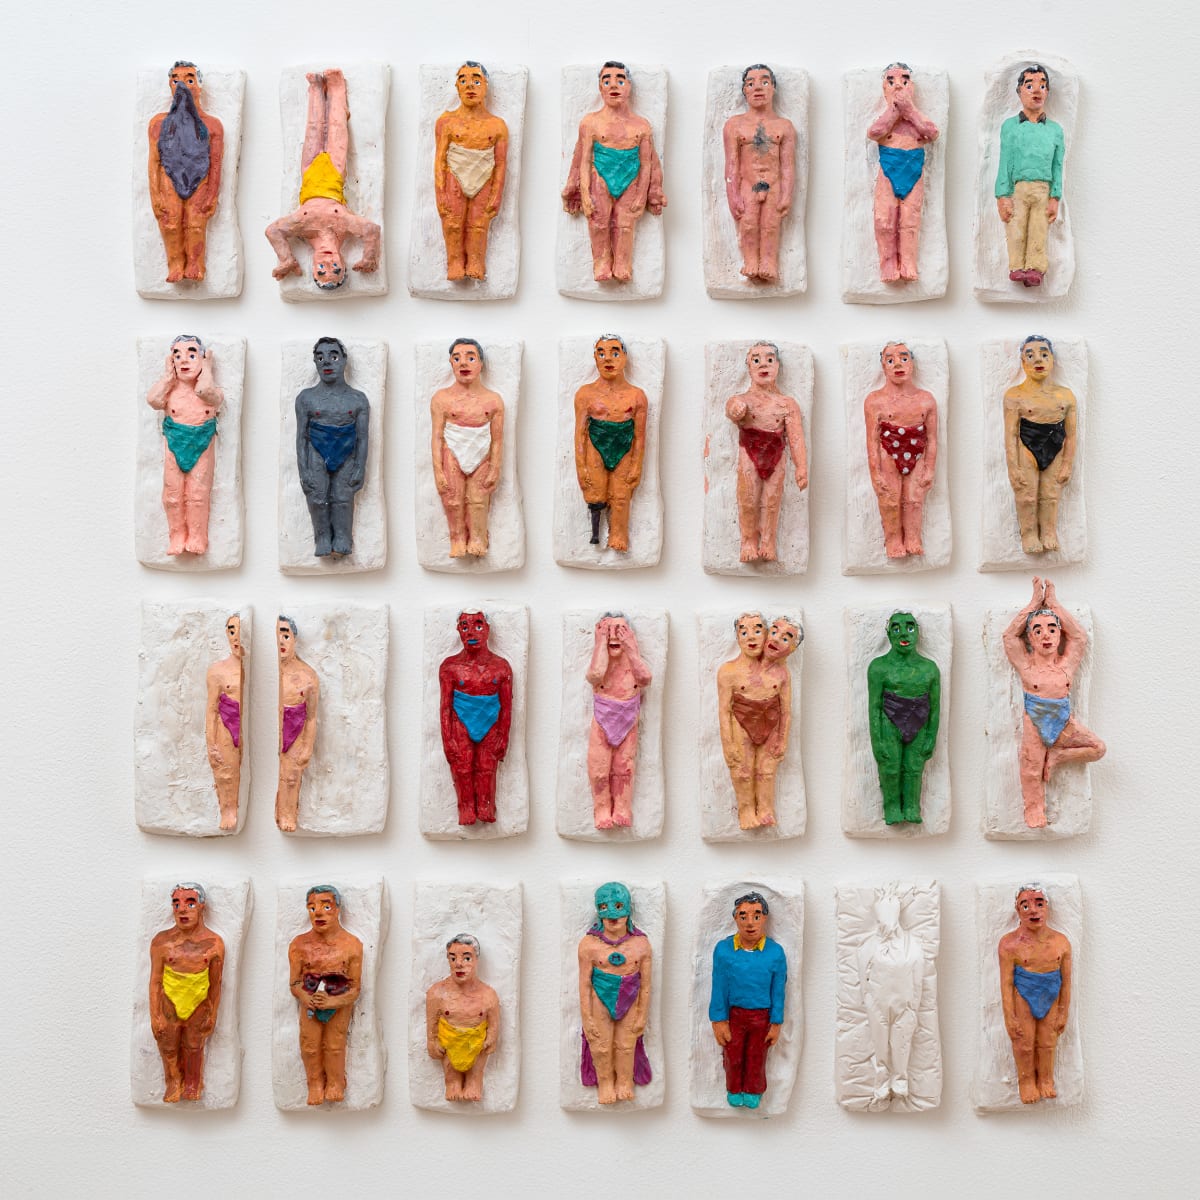 Self-Portraits with Underwear Pulled Too High by Matthew Freedman  Image: 28 out of 224 sculptures